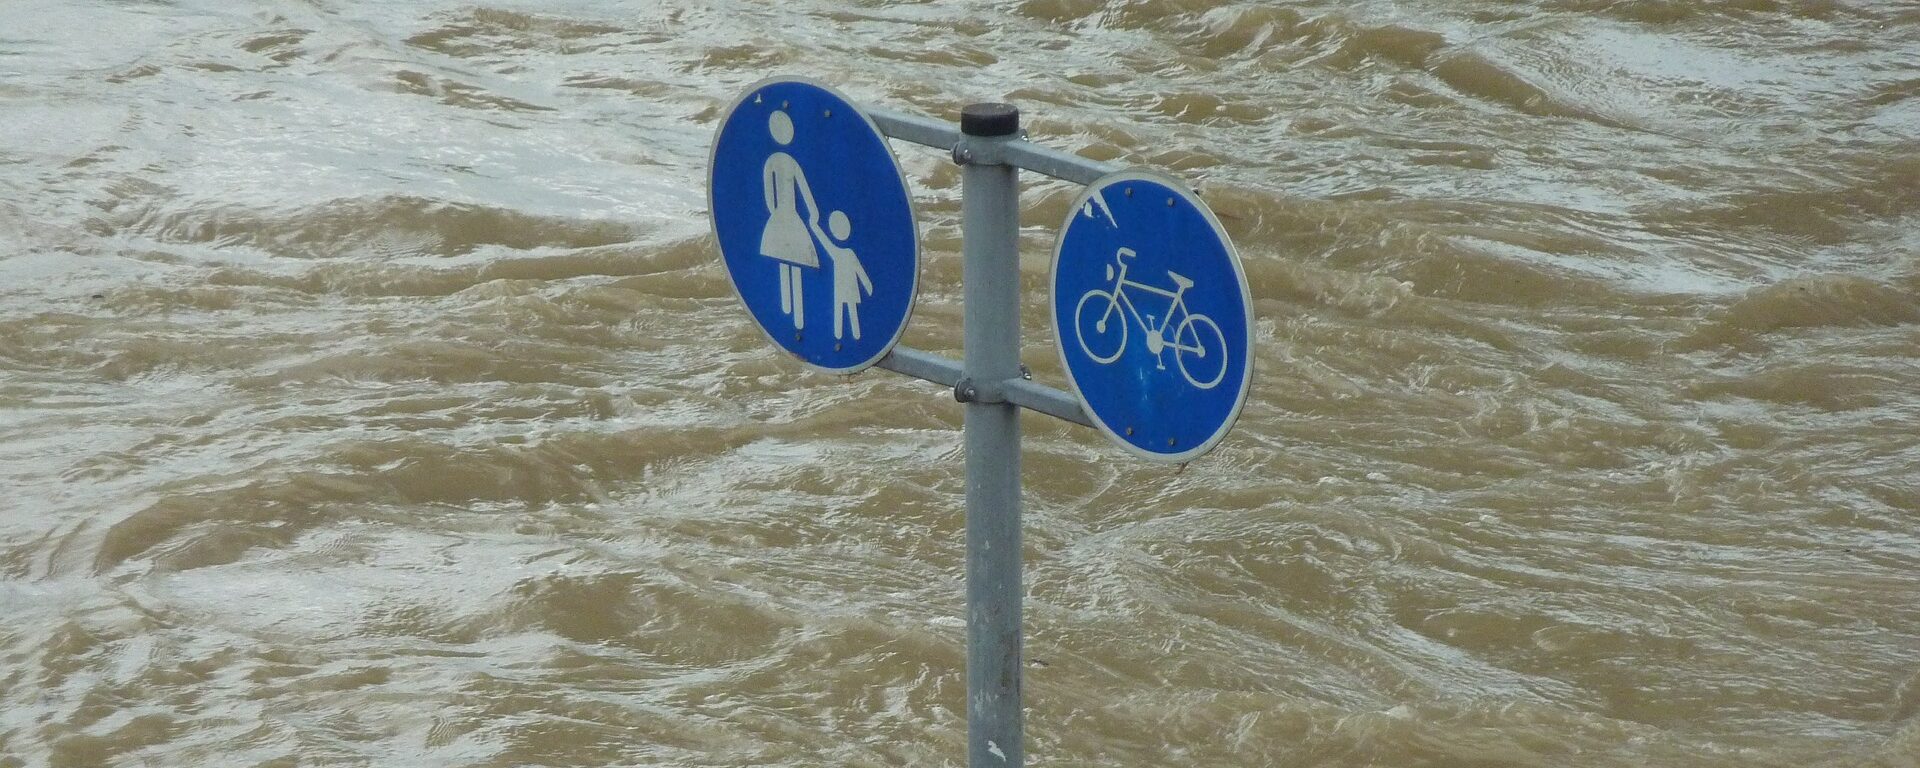 Street sign stick out of flood water.